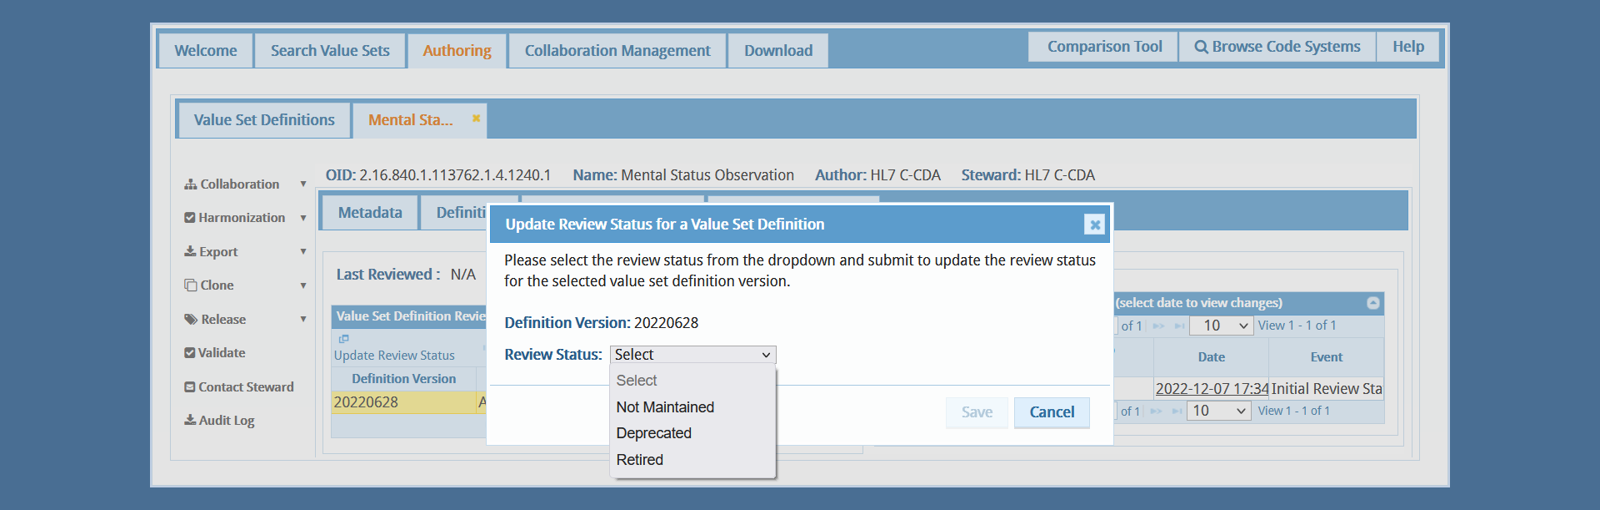 Update Review Status for a Value Set Definition window